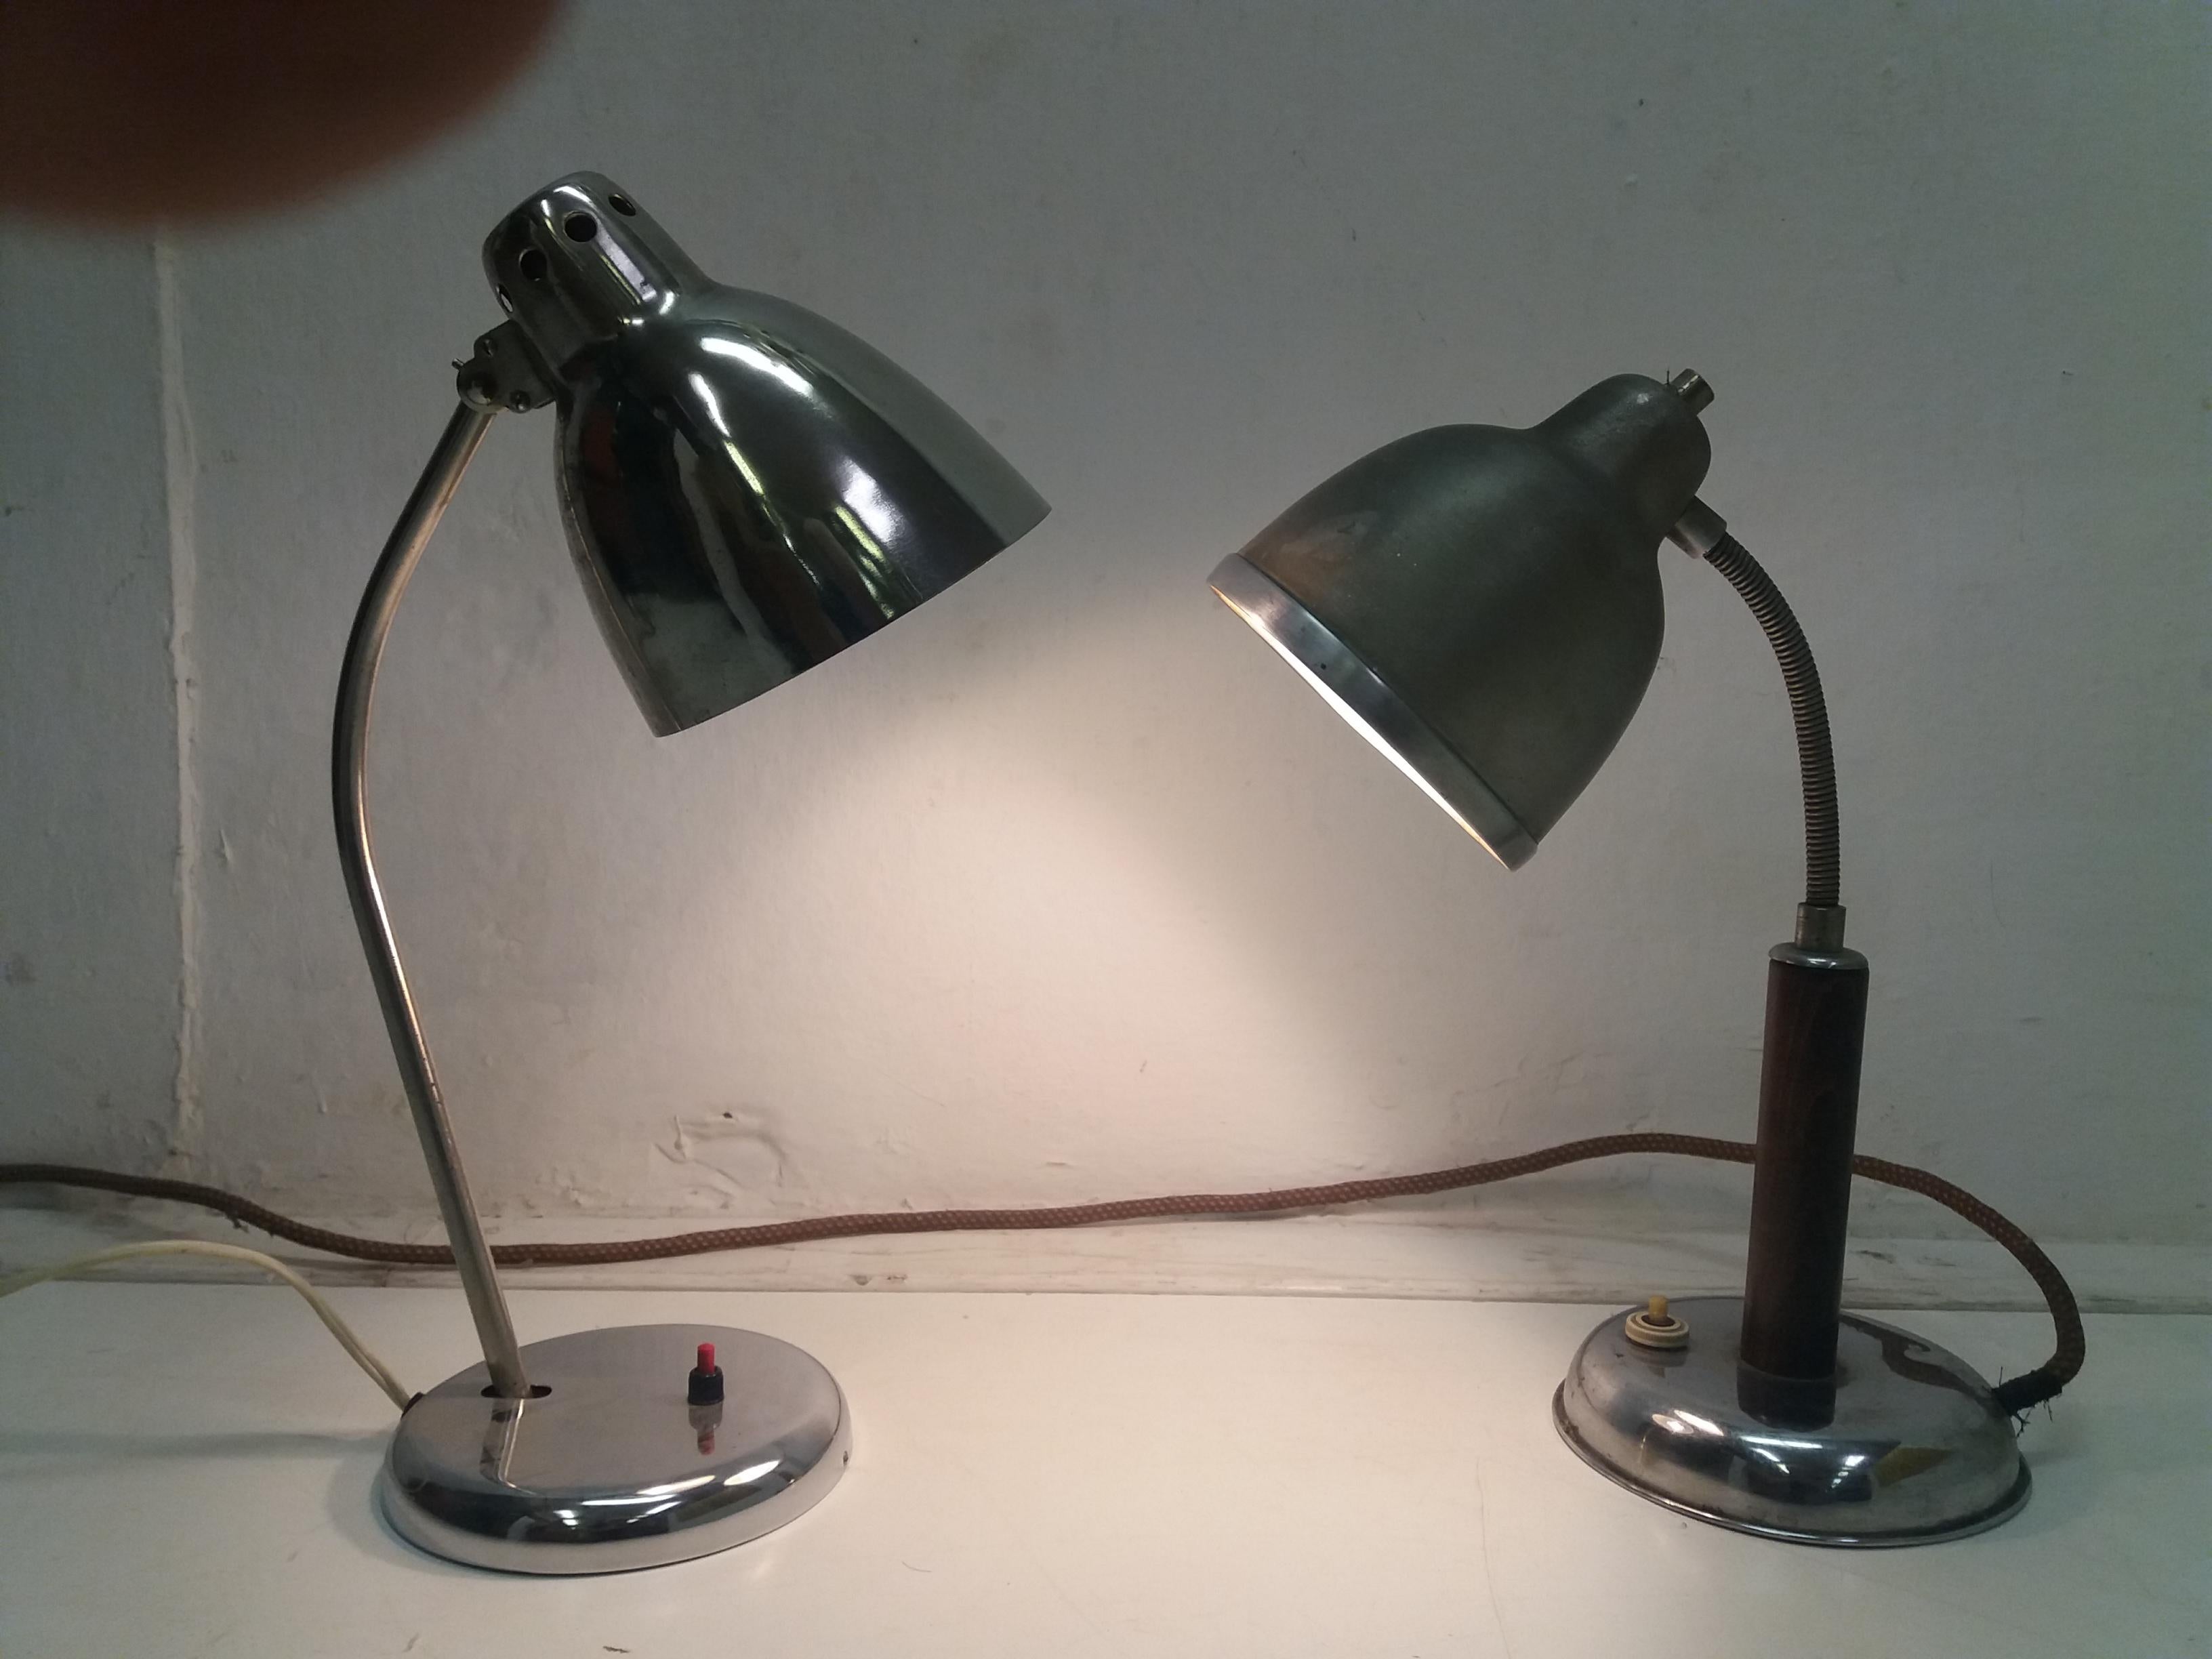 - Made in Czechoslovakia
- Made of metal, chrome and wood
- 1. lamp: all chrome, adjustable, 1935
Dimension: H 51 x W 25 x D 16
- 2.lamp: metal, wood, nykl, adjustable, 1940
Dimension: H 46 x W 25 x D 16
- Fully functional
- Good original